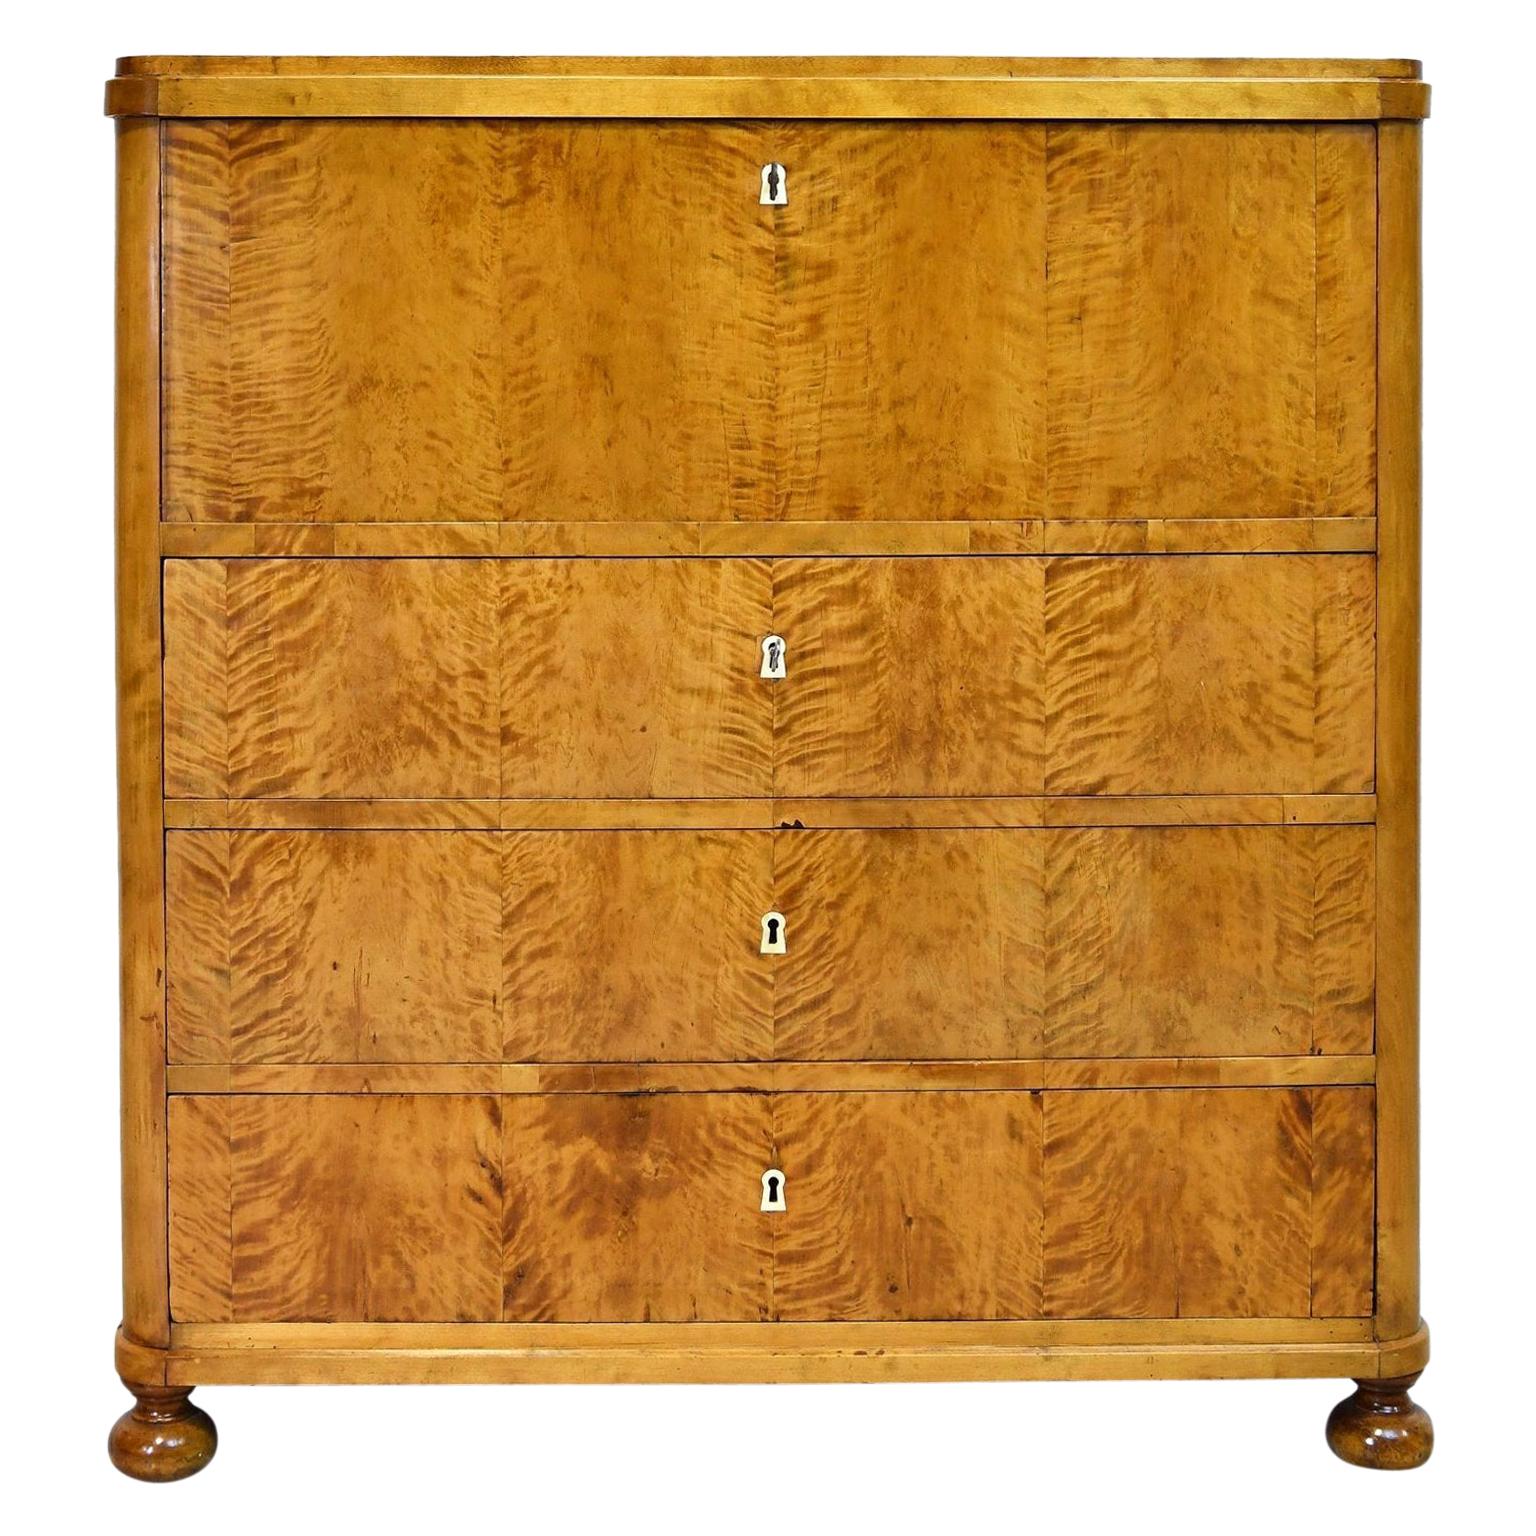 Swedish Karl Johan Biedermeier chest of drawers in book-matched fire birch veneer with fall-front secretary opening to reveal seventeen small drawers and a central cubby whose fascia are all in burled olive wood with turned pulls. Nine interior